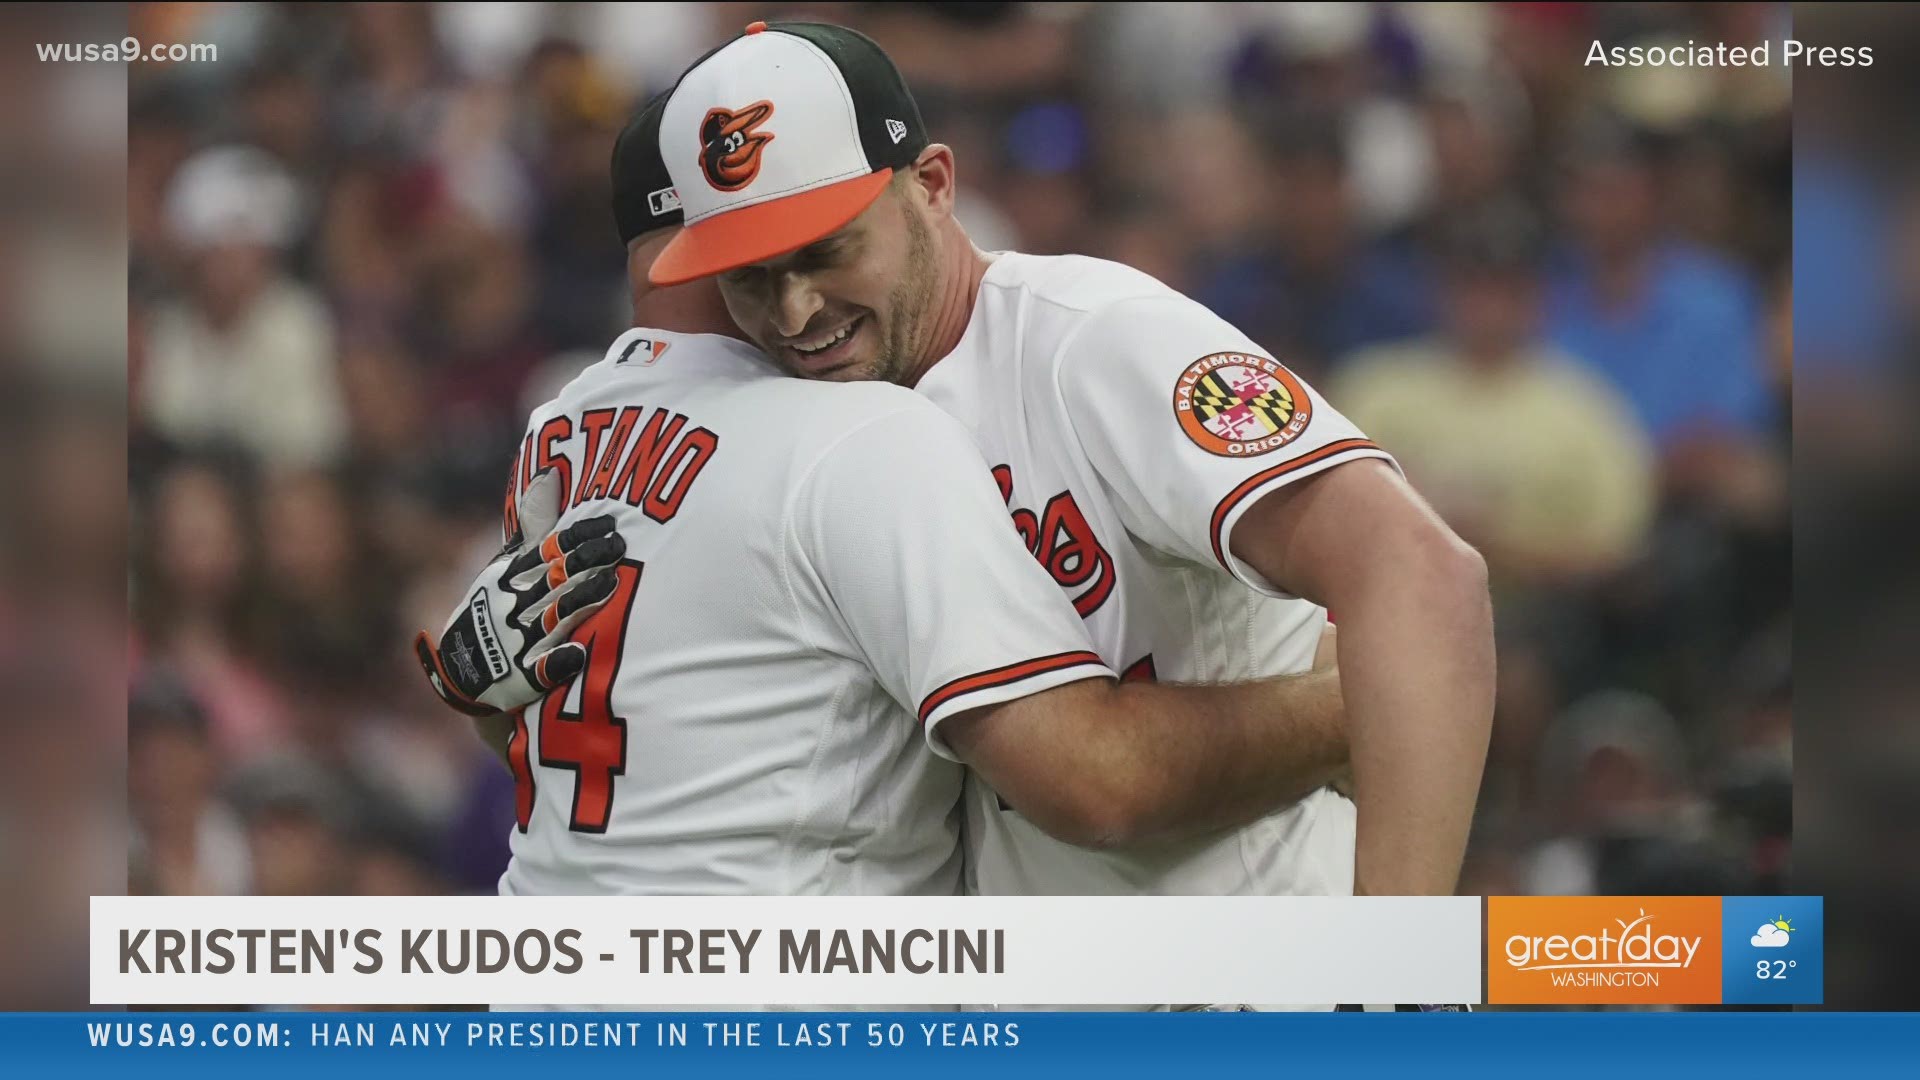 Baltimore Orioles' Trey Mancini proves there is "life after cancer" finishing 2nd in the MLB All-Star Home Run Derby I Kristen's Kudos for July 13, 2021